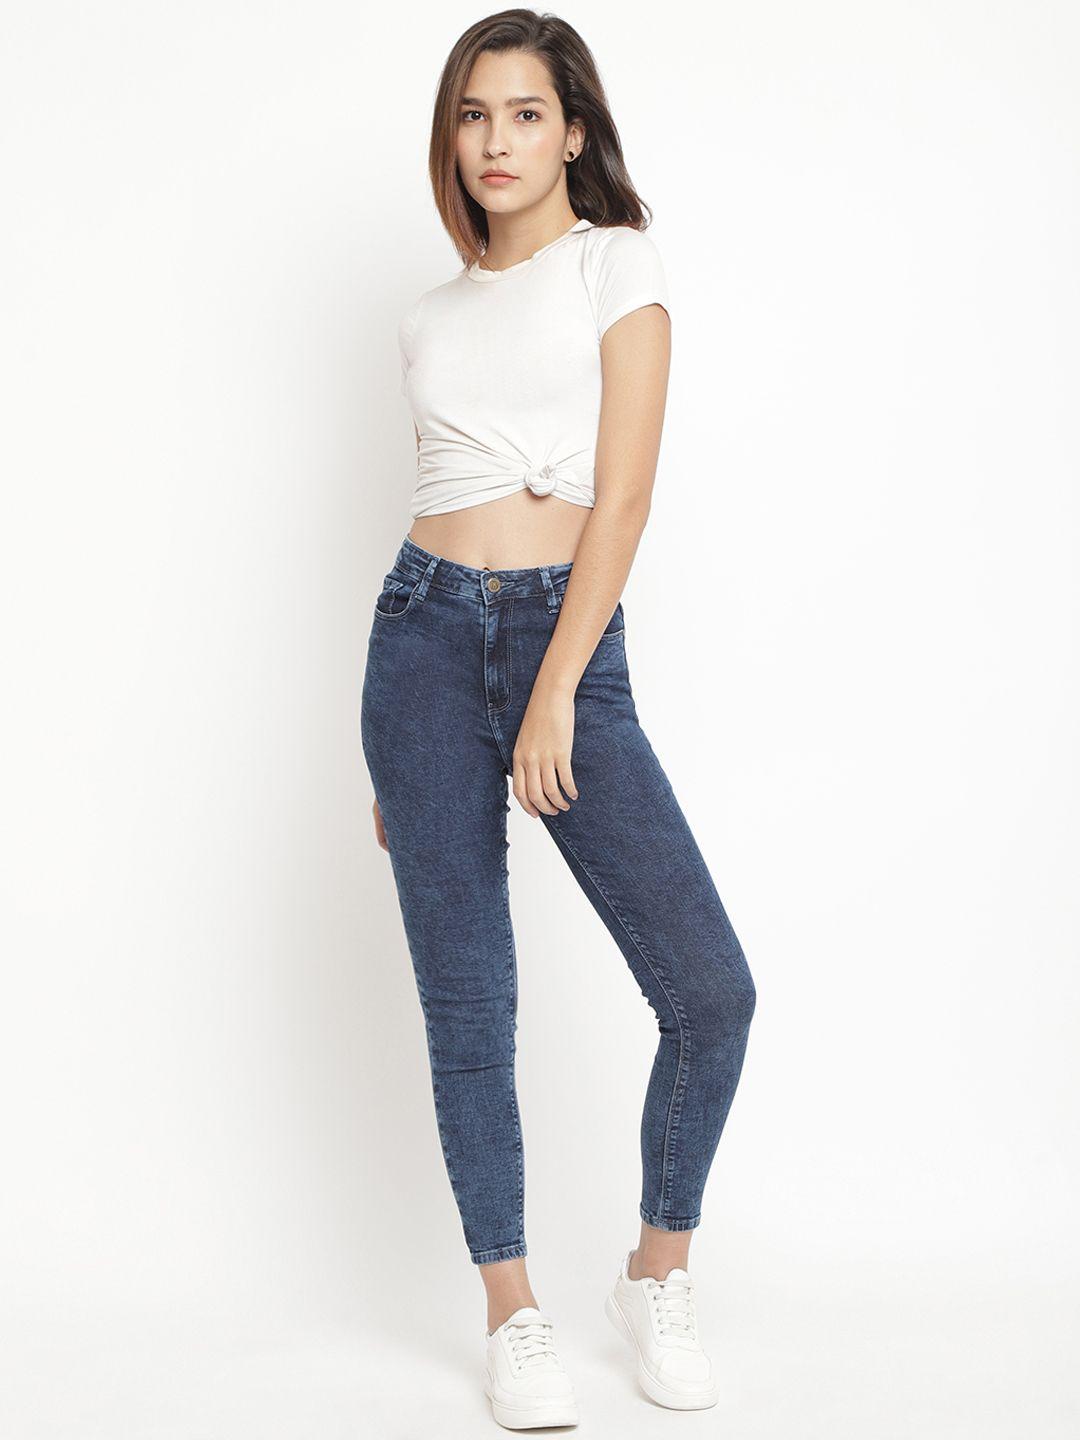 belliskey-women-blue-skinny-fit-high-rise-clean-look-stretchable-jeans